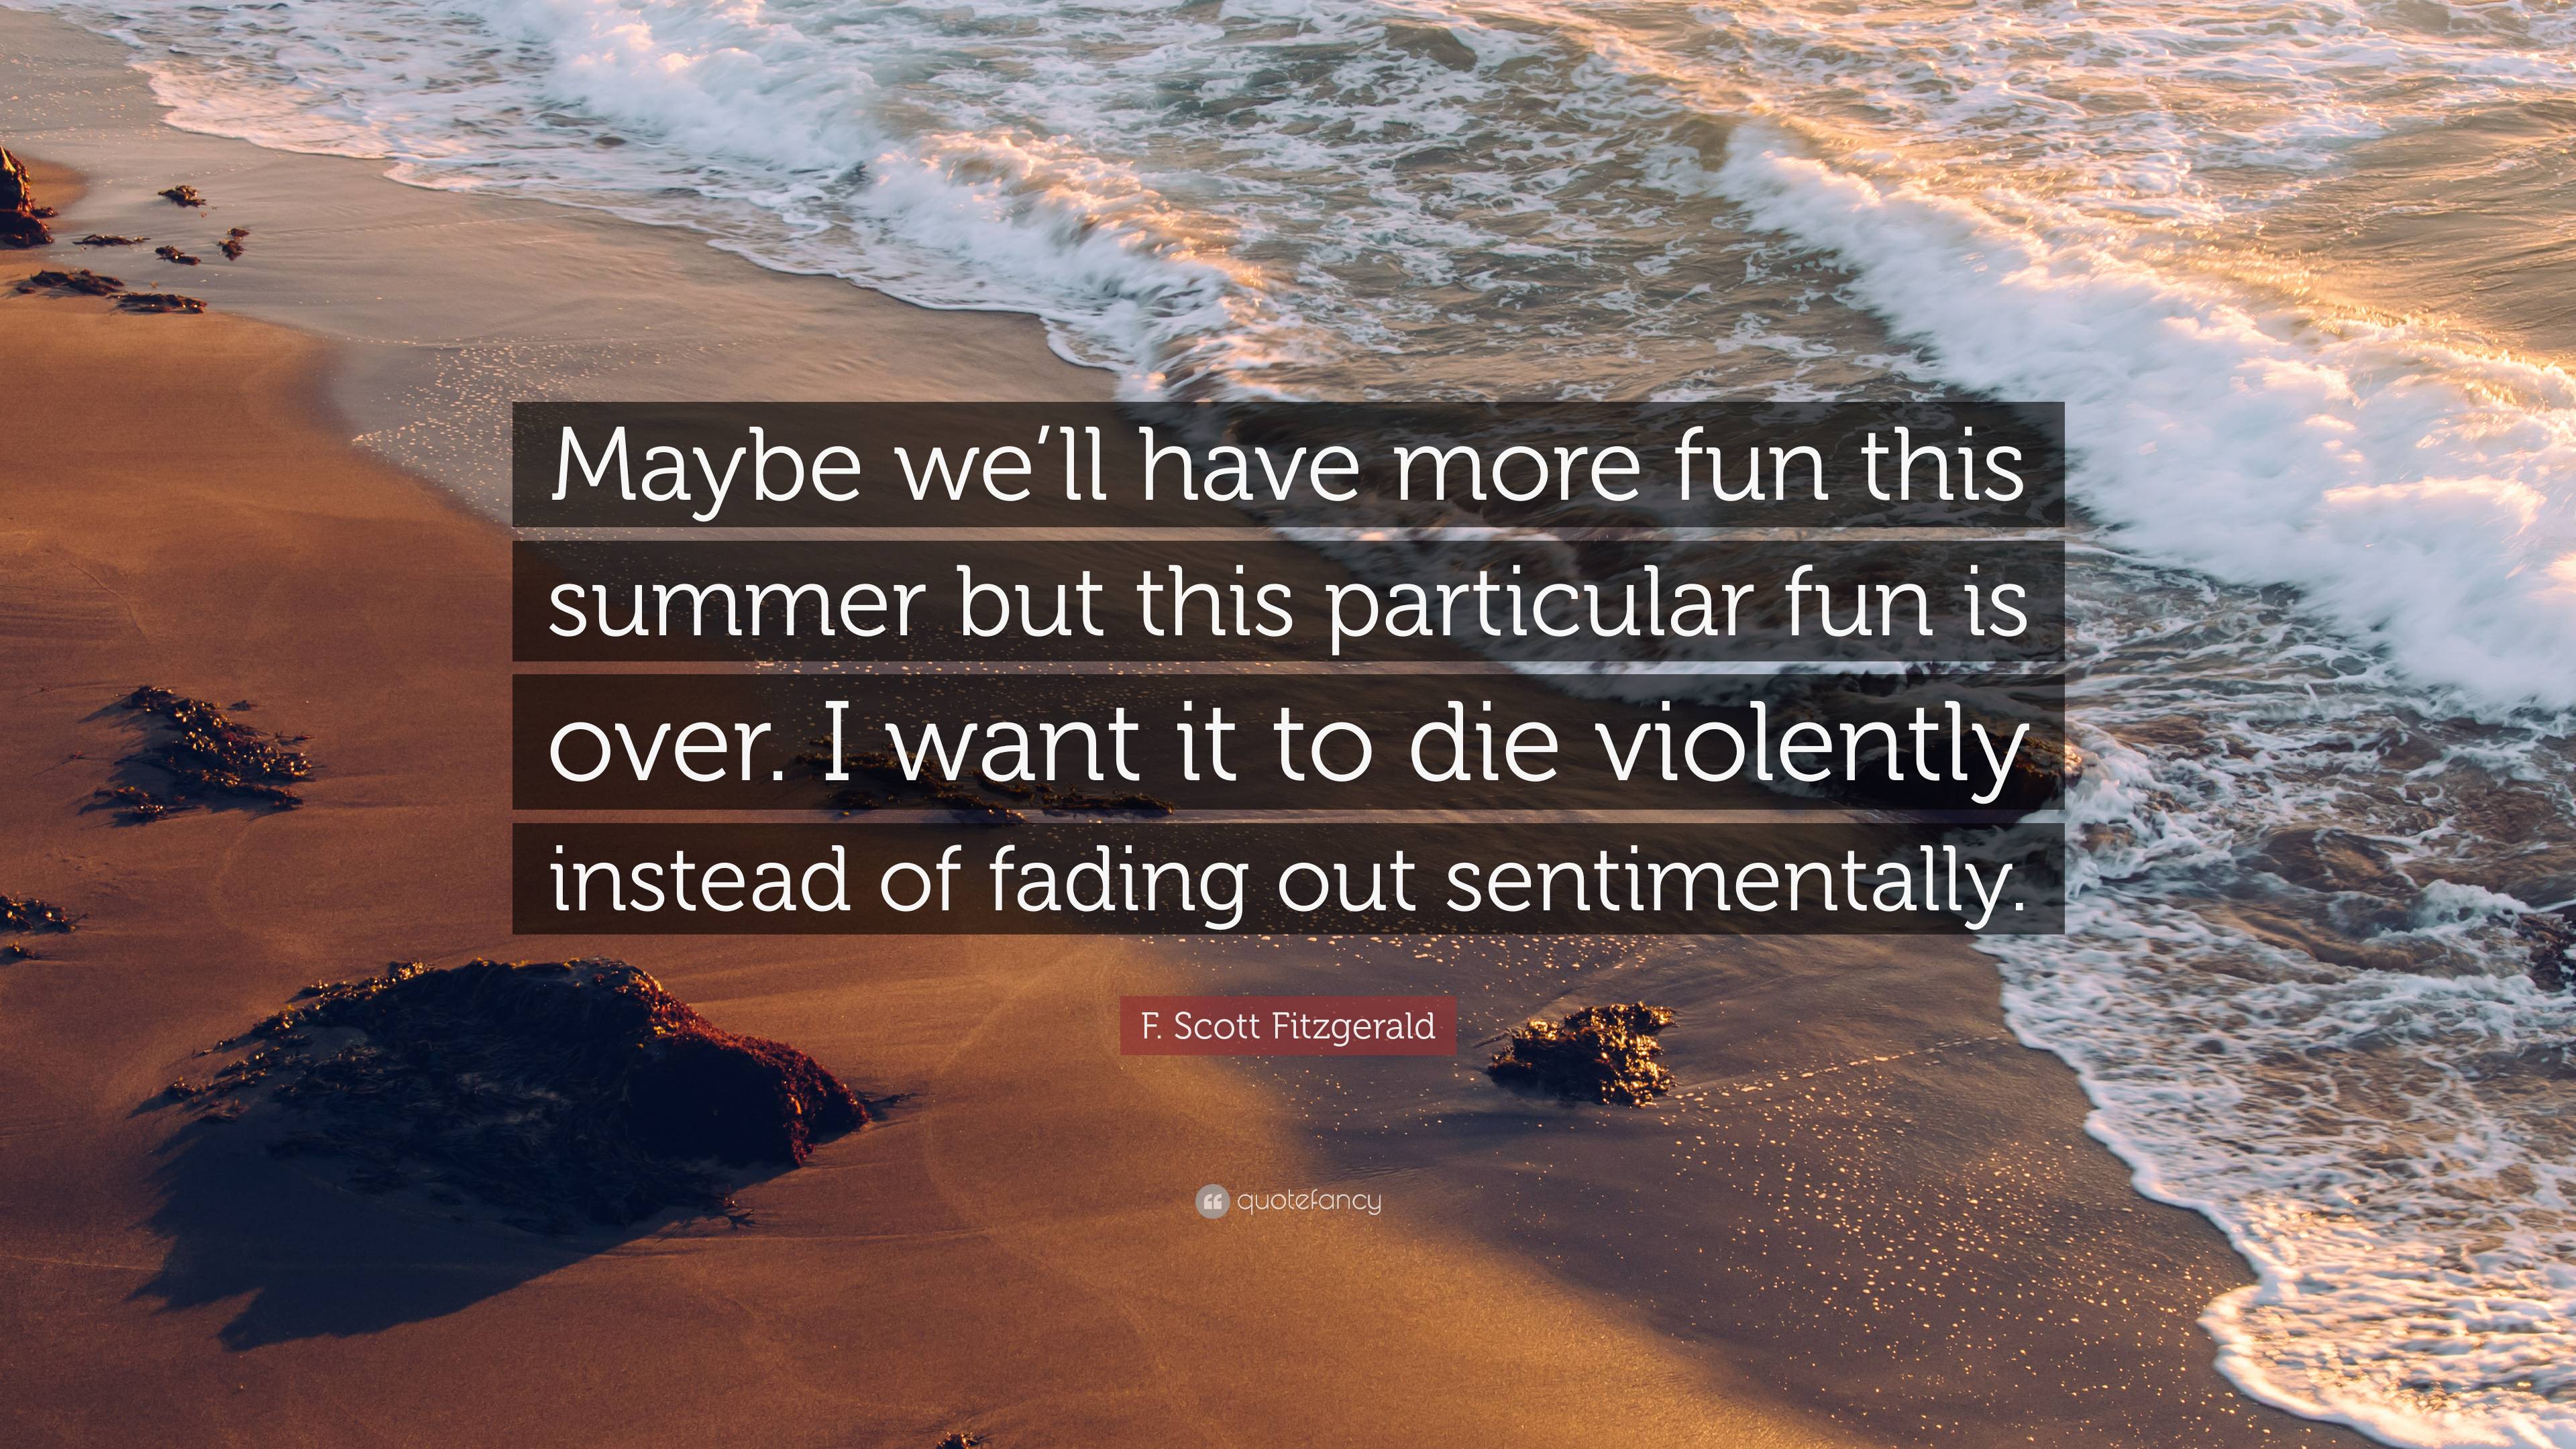 F. Scott Fitzgerald Quote: “Maybe we'll have more fun this summer but this particular fun is over. I want it to die violently instead of fading out .”